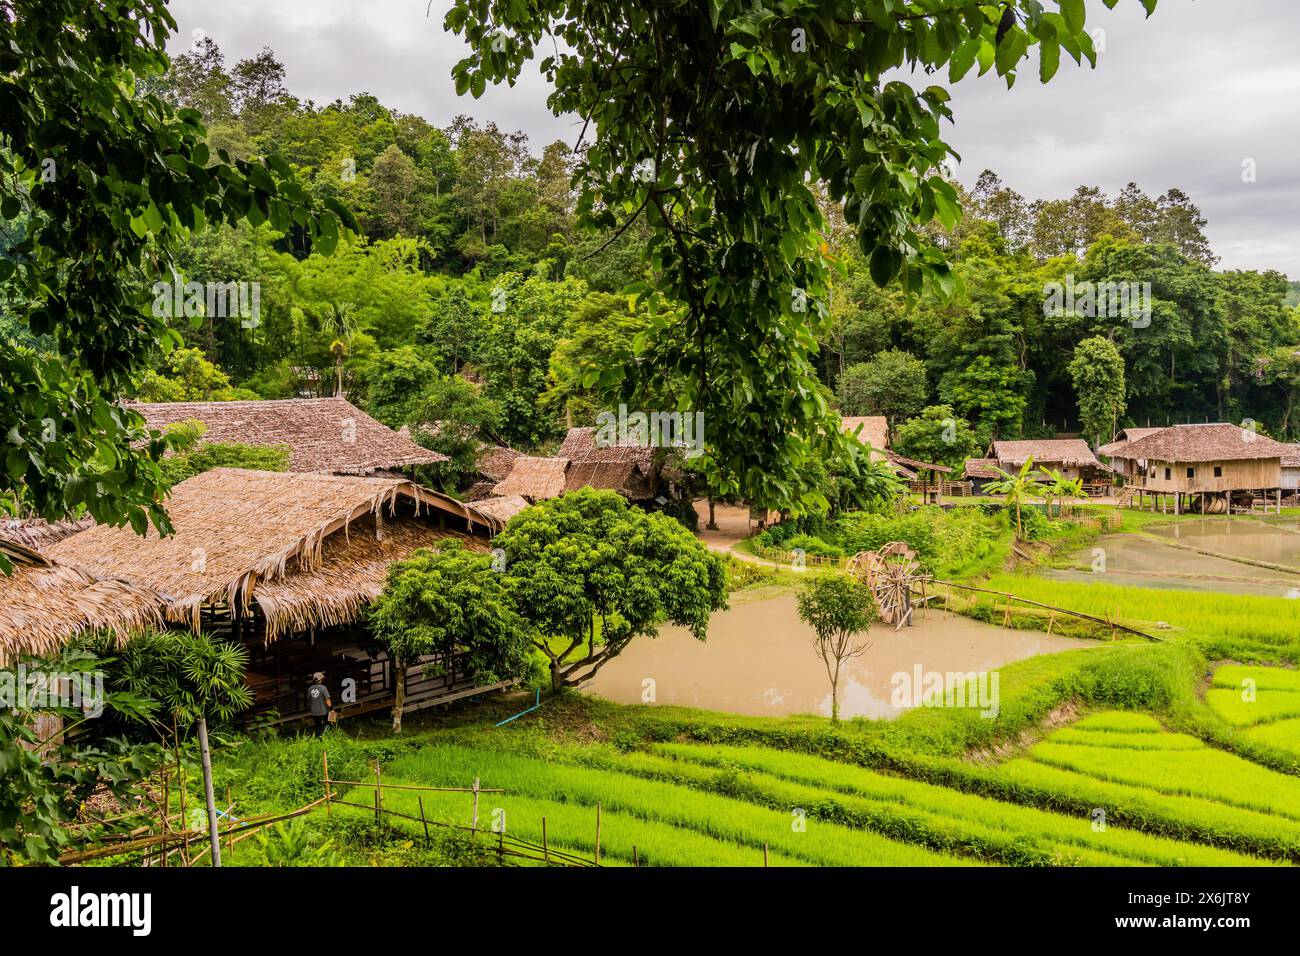 Landscape of rice paddies and buildings located at Chiang Doa Five Hill Tribes Village in Thailand Stock Photo